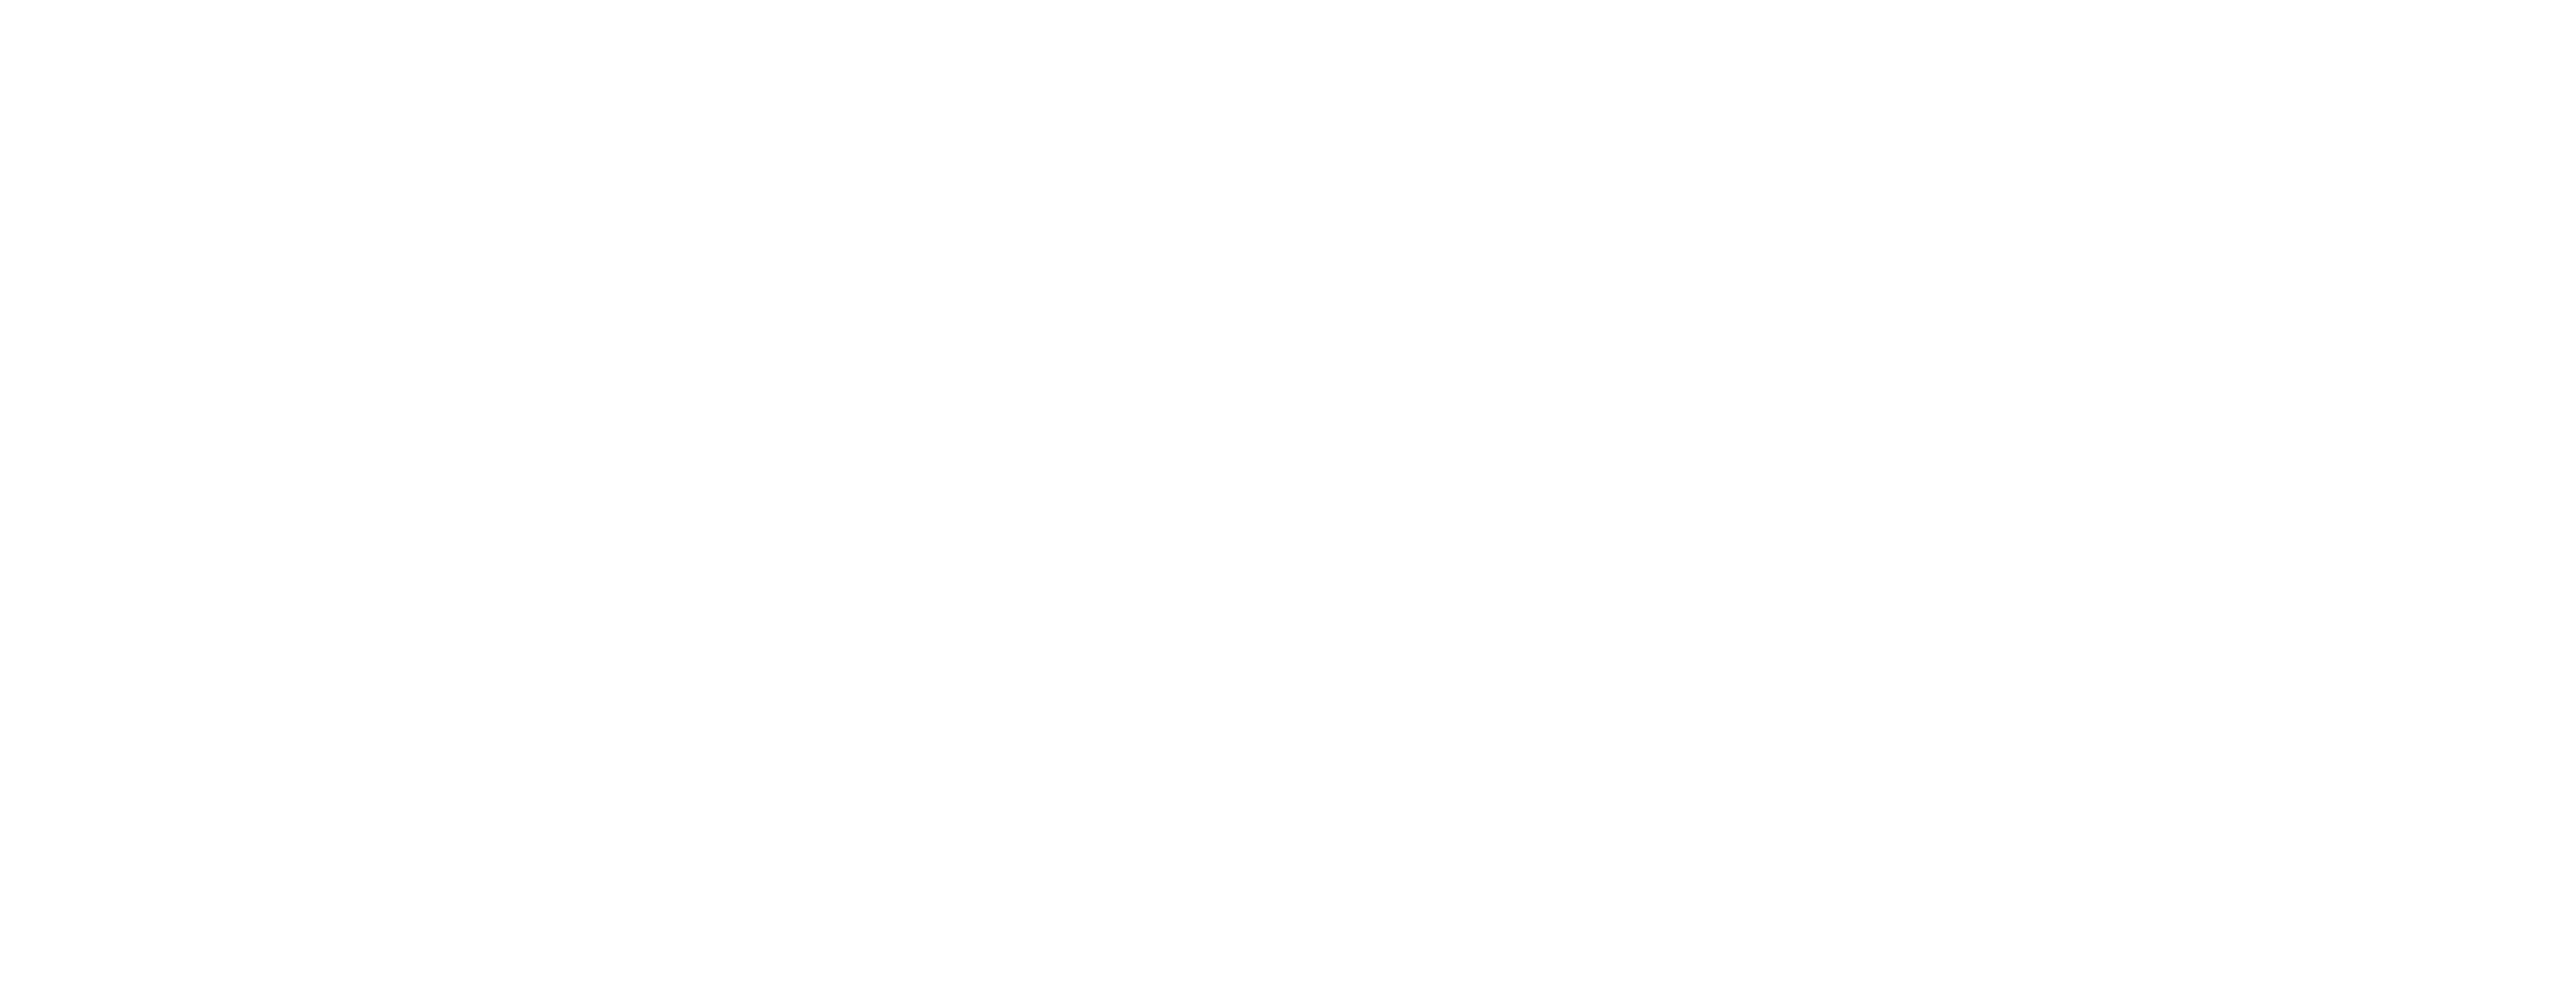 Village of the Damned logo